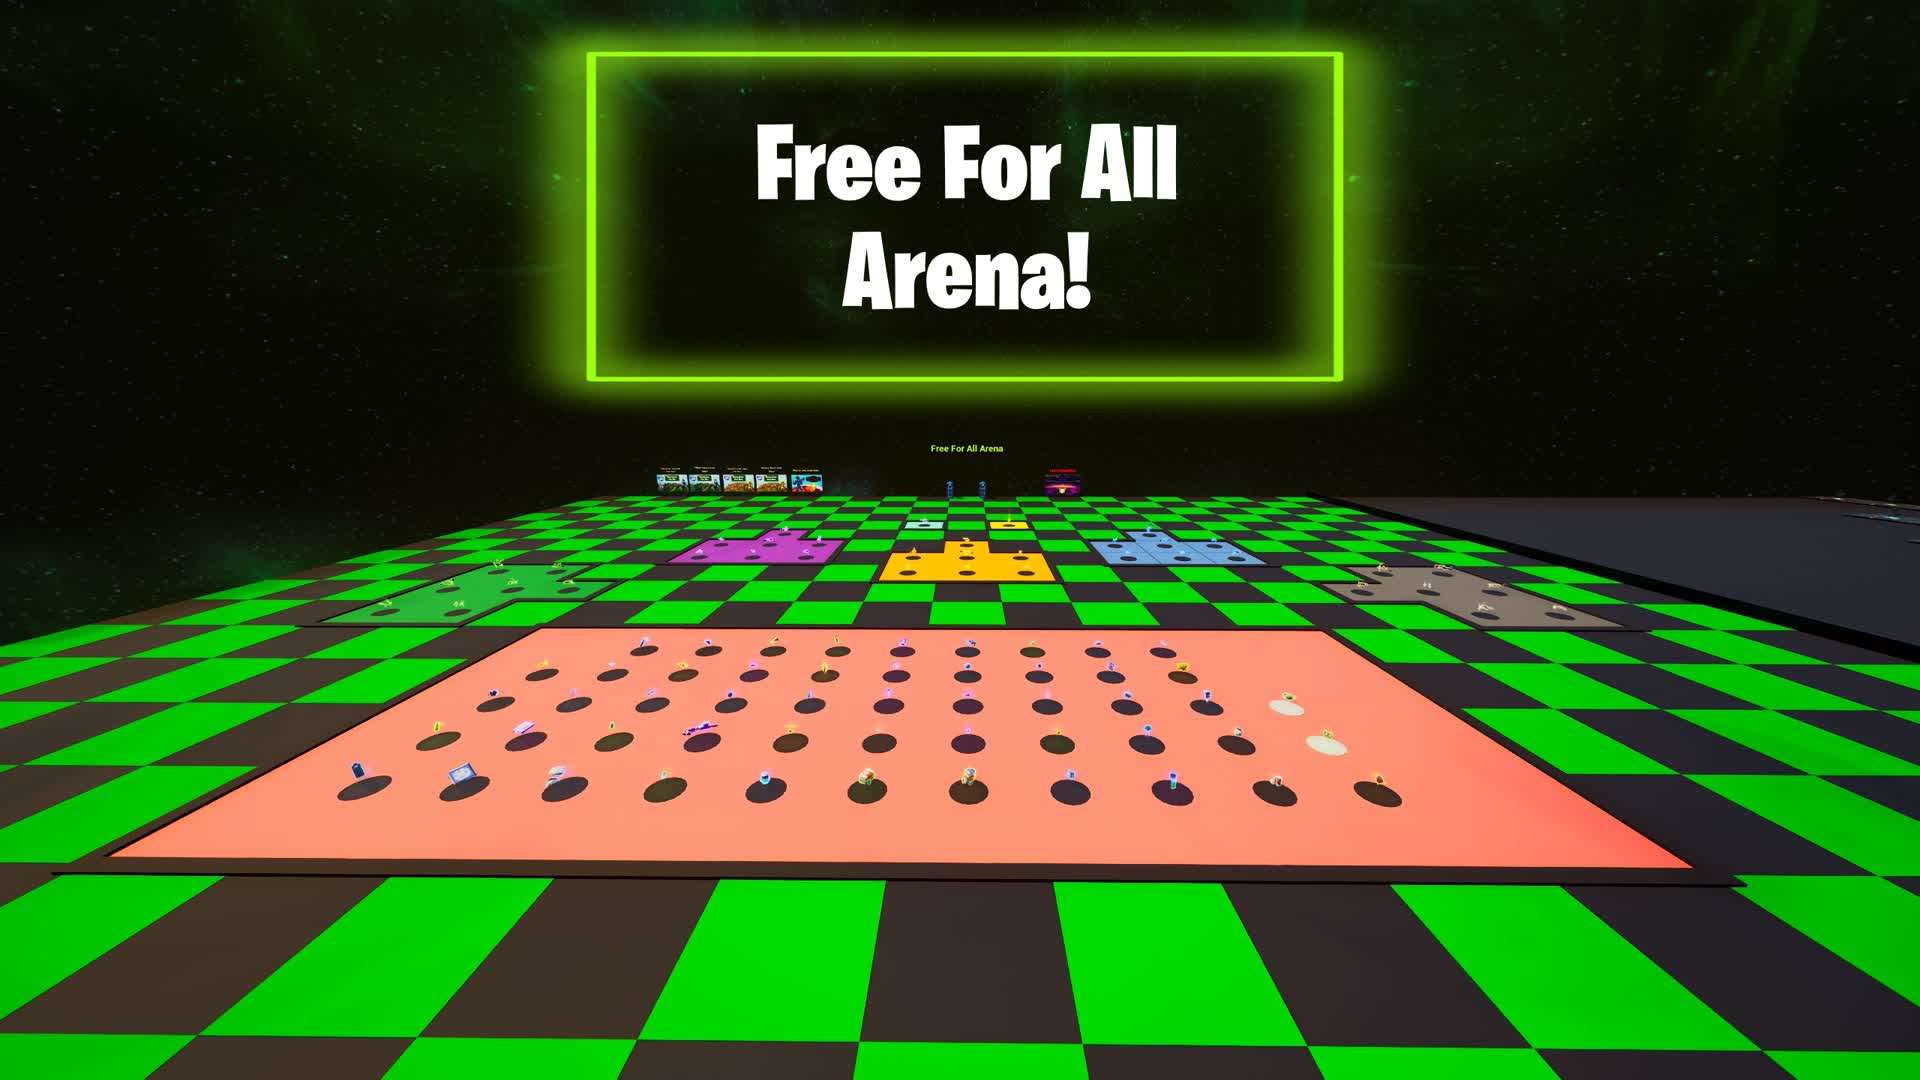 SPECTRAL'S ARENA - FREE FOR ALL